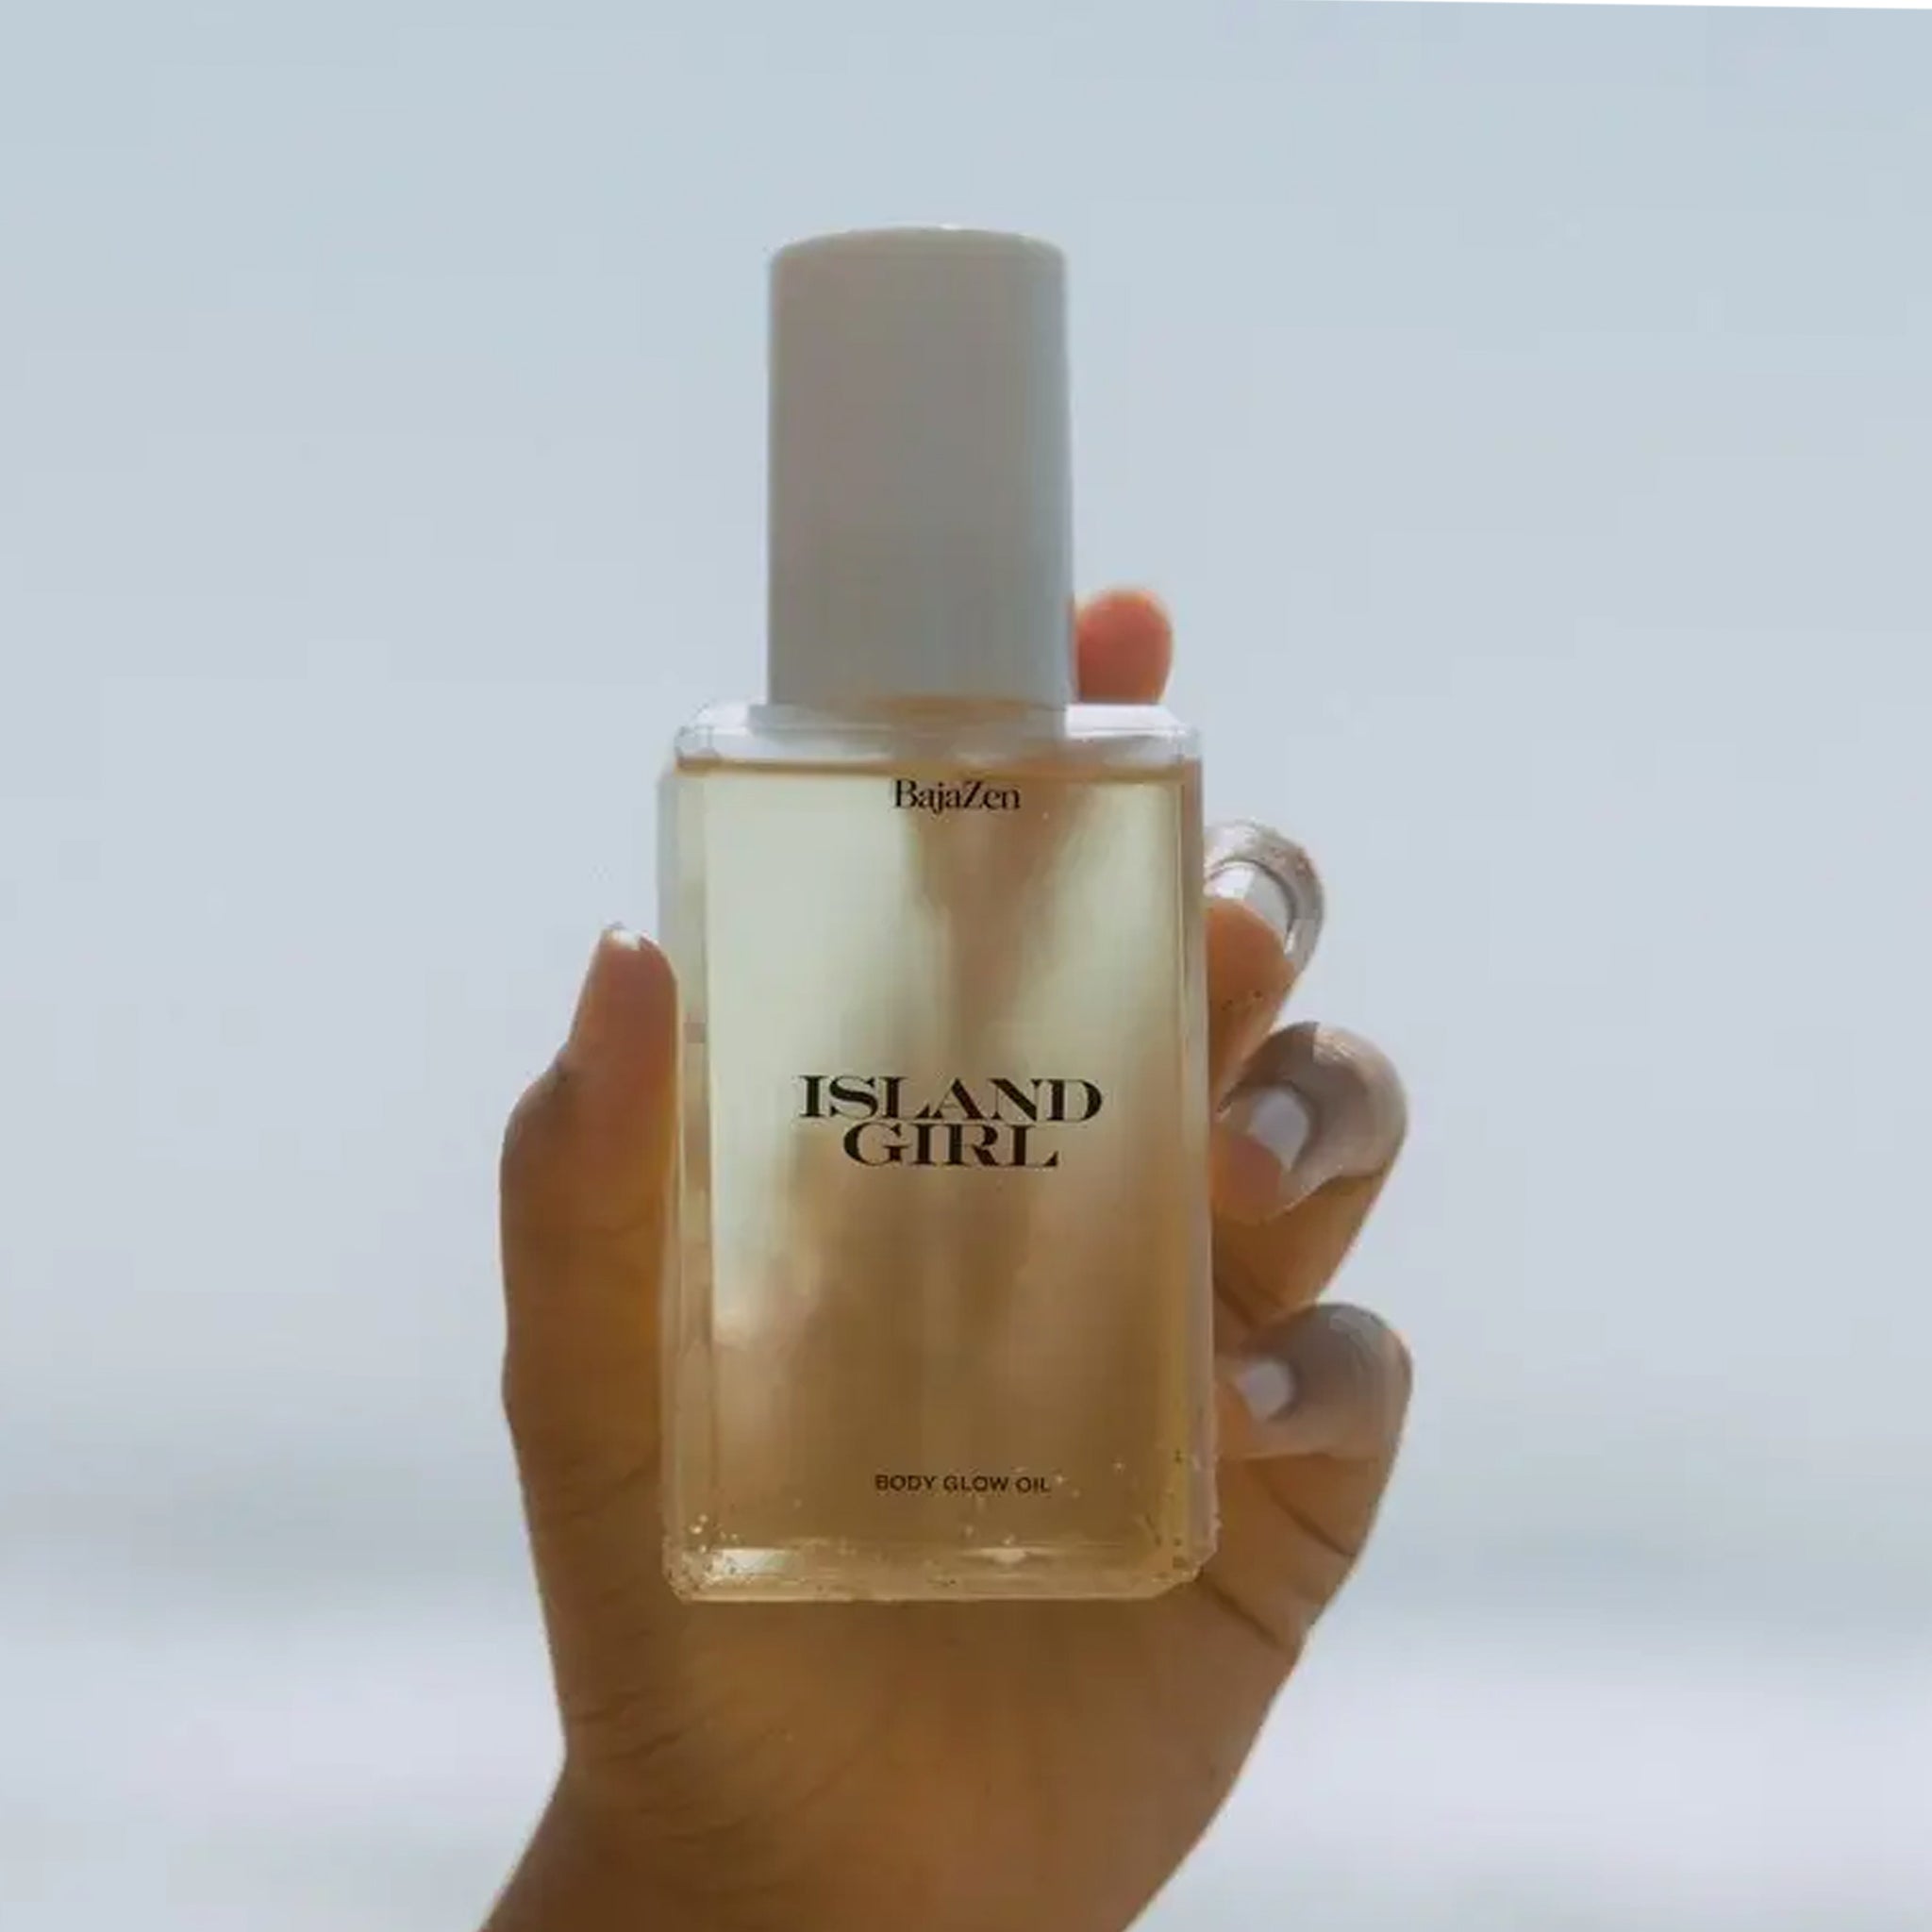 A clear container of body glow oil with a white pump lid and black text that reads, "Island Girl".